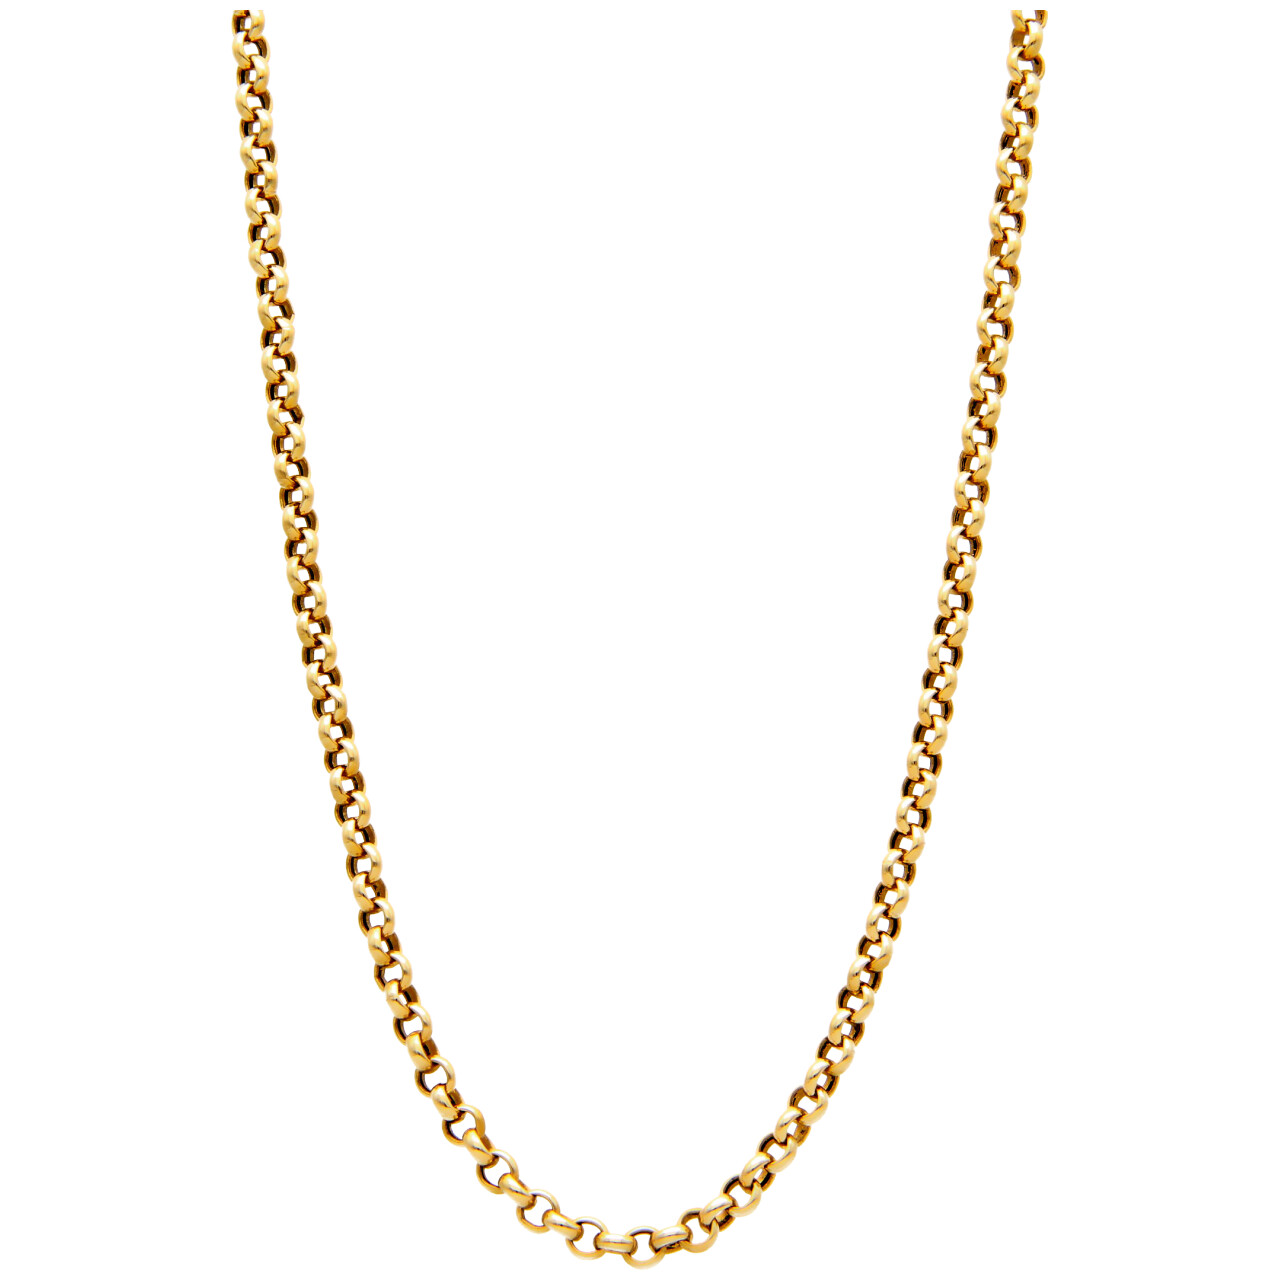 Chini yellow gold necklace